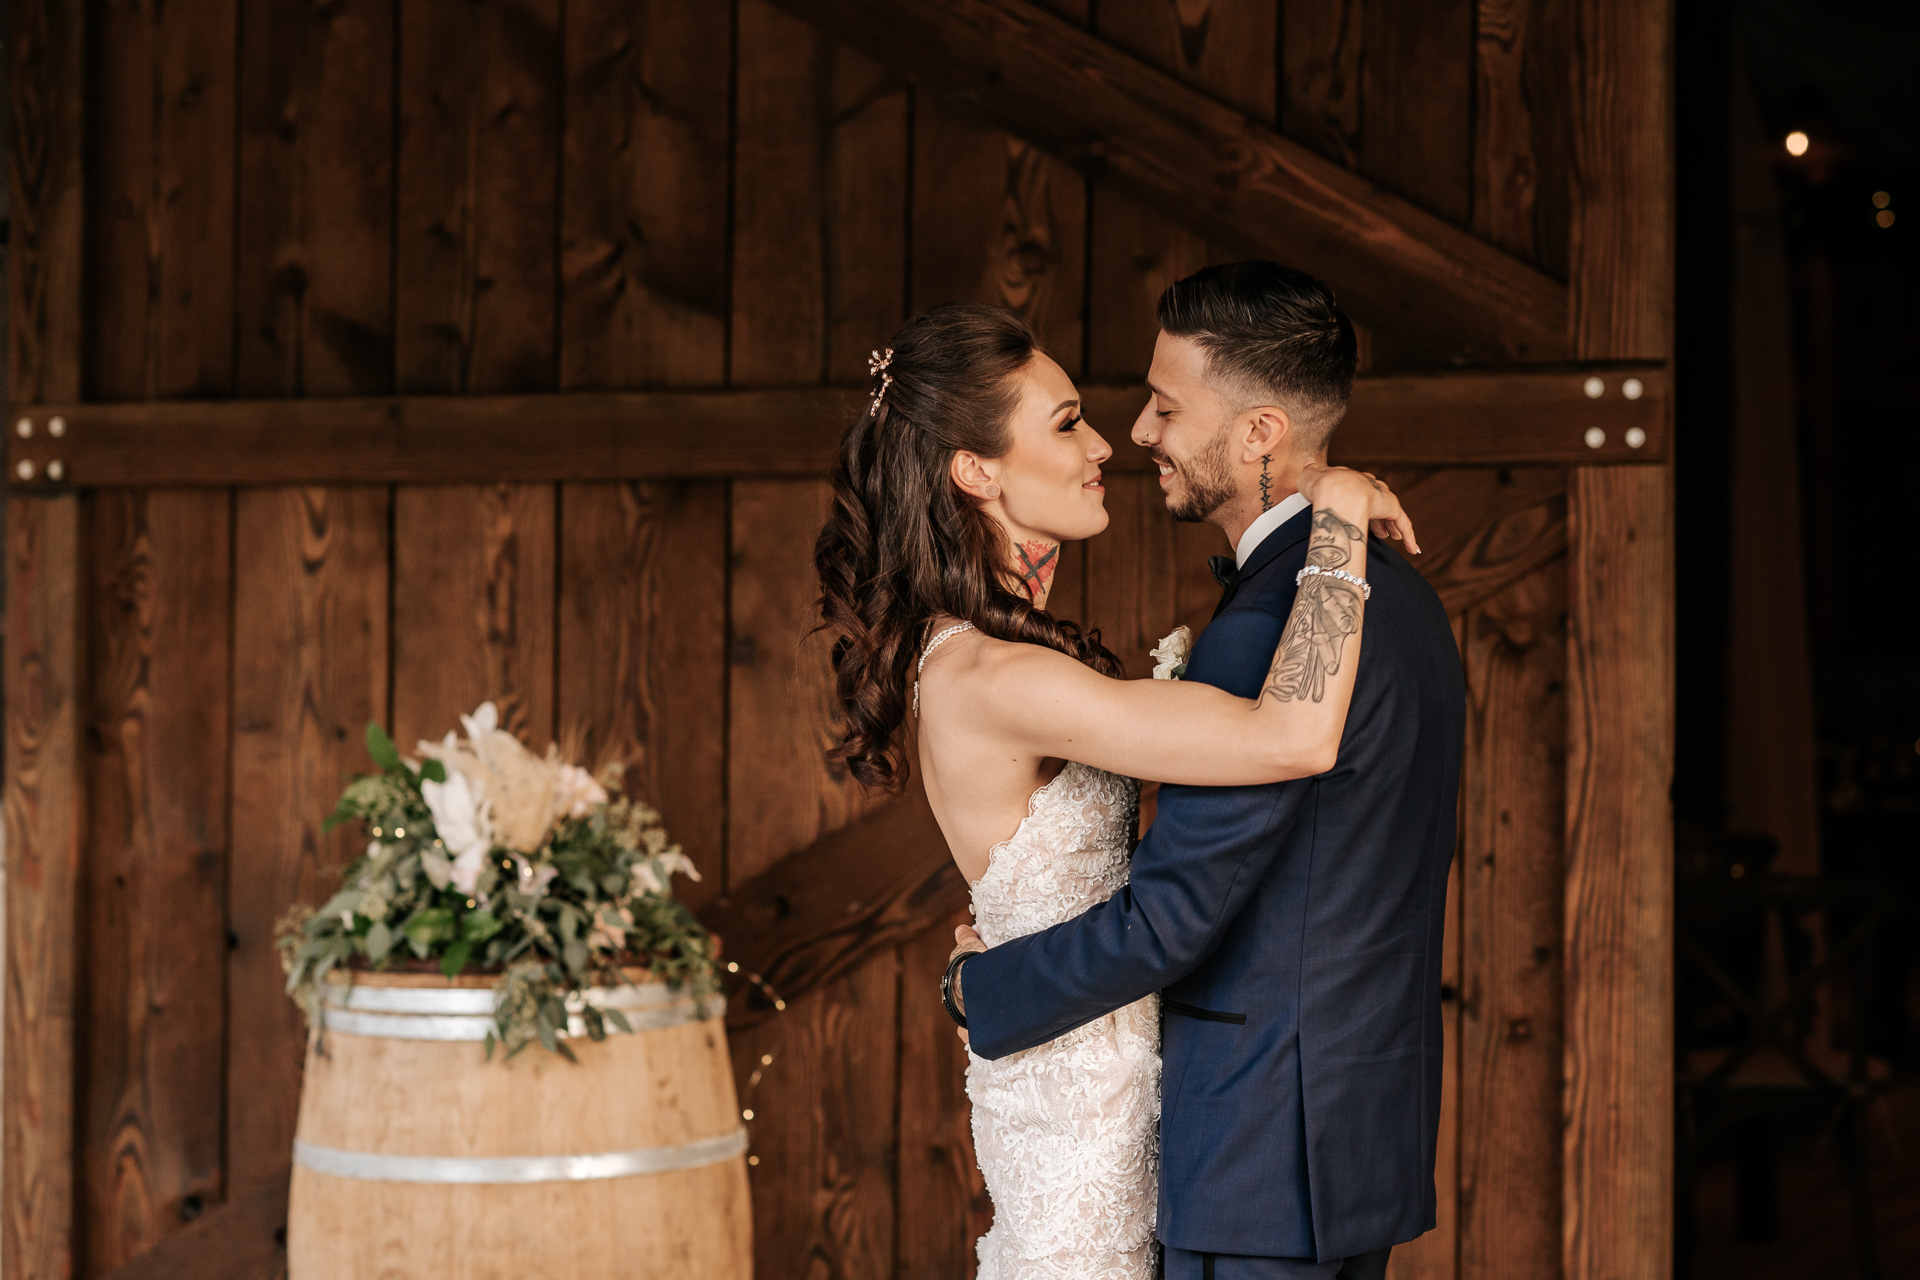 Bride and Groom looking into each others eyes with a boho floral arrangement with pompous grass on a wine barrel in the background